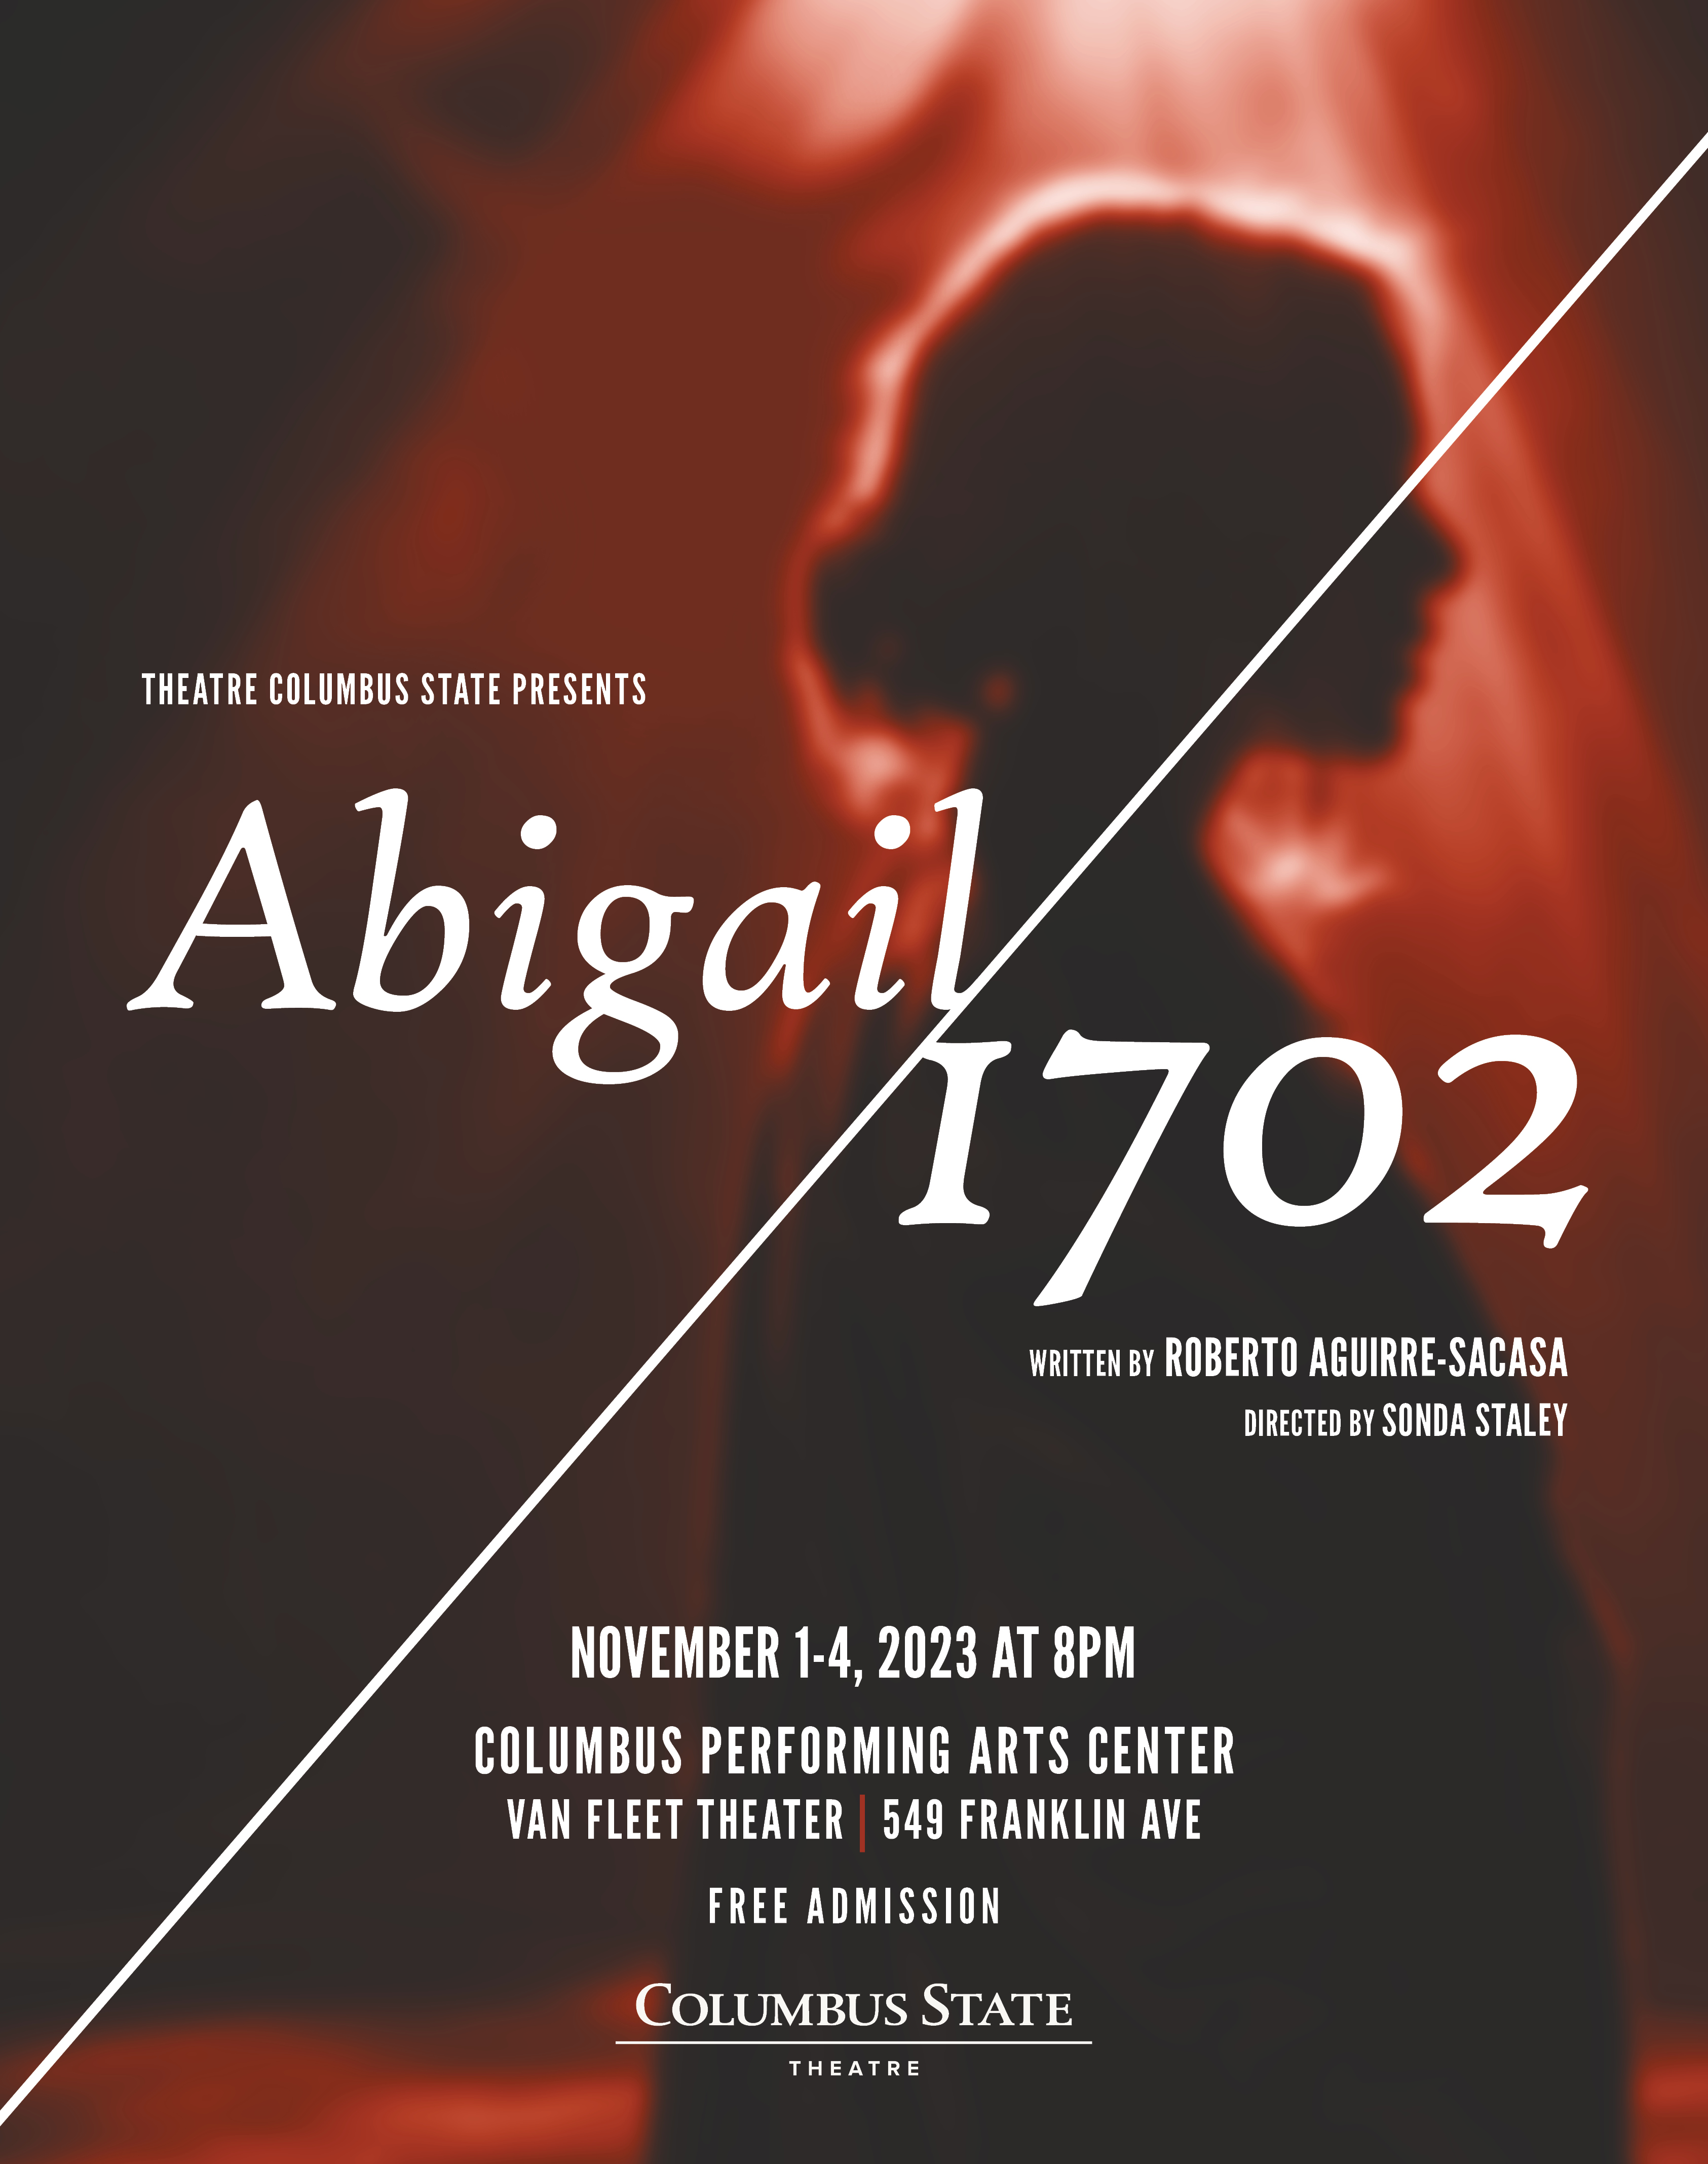 The "Abigail/1702" poster. 